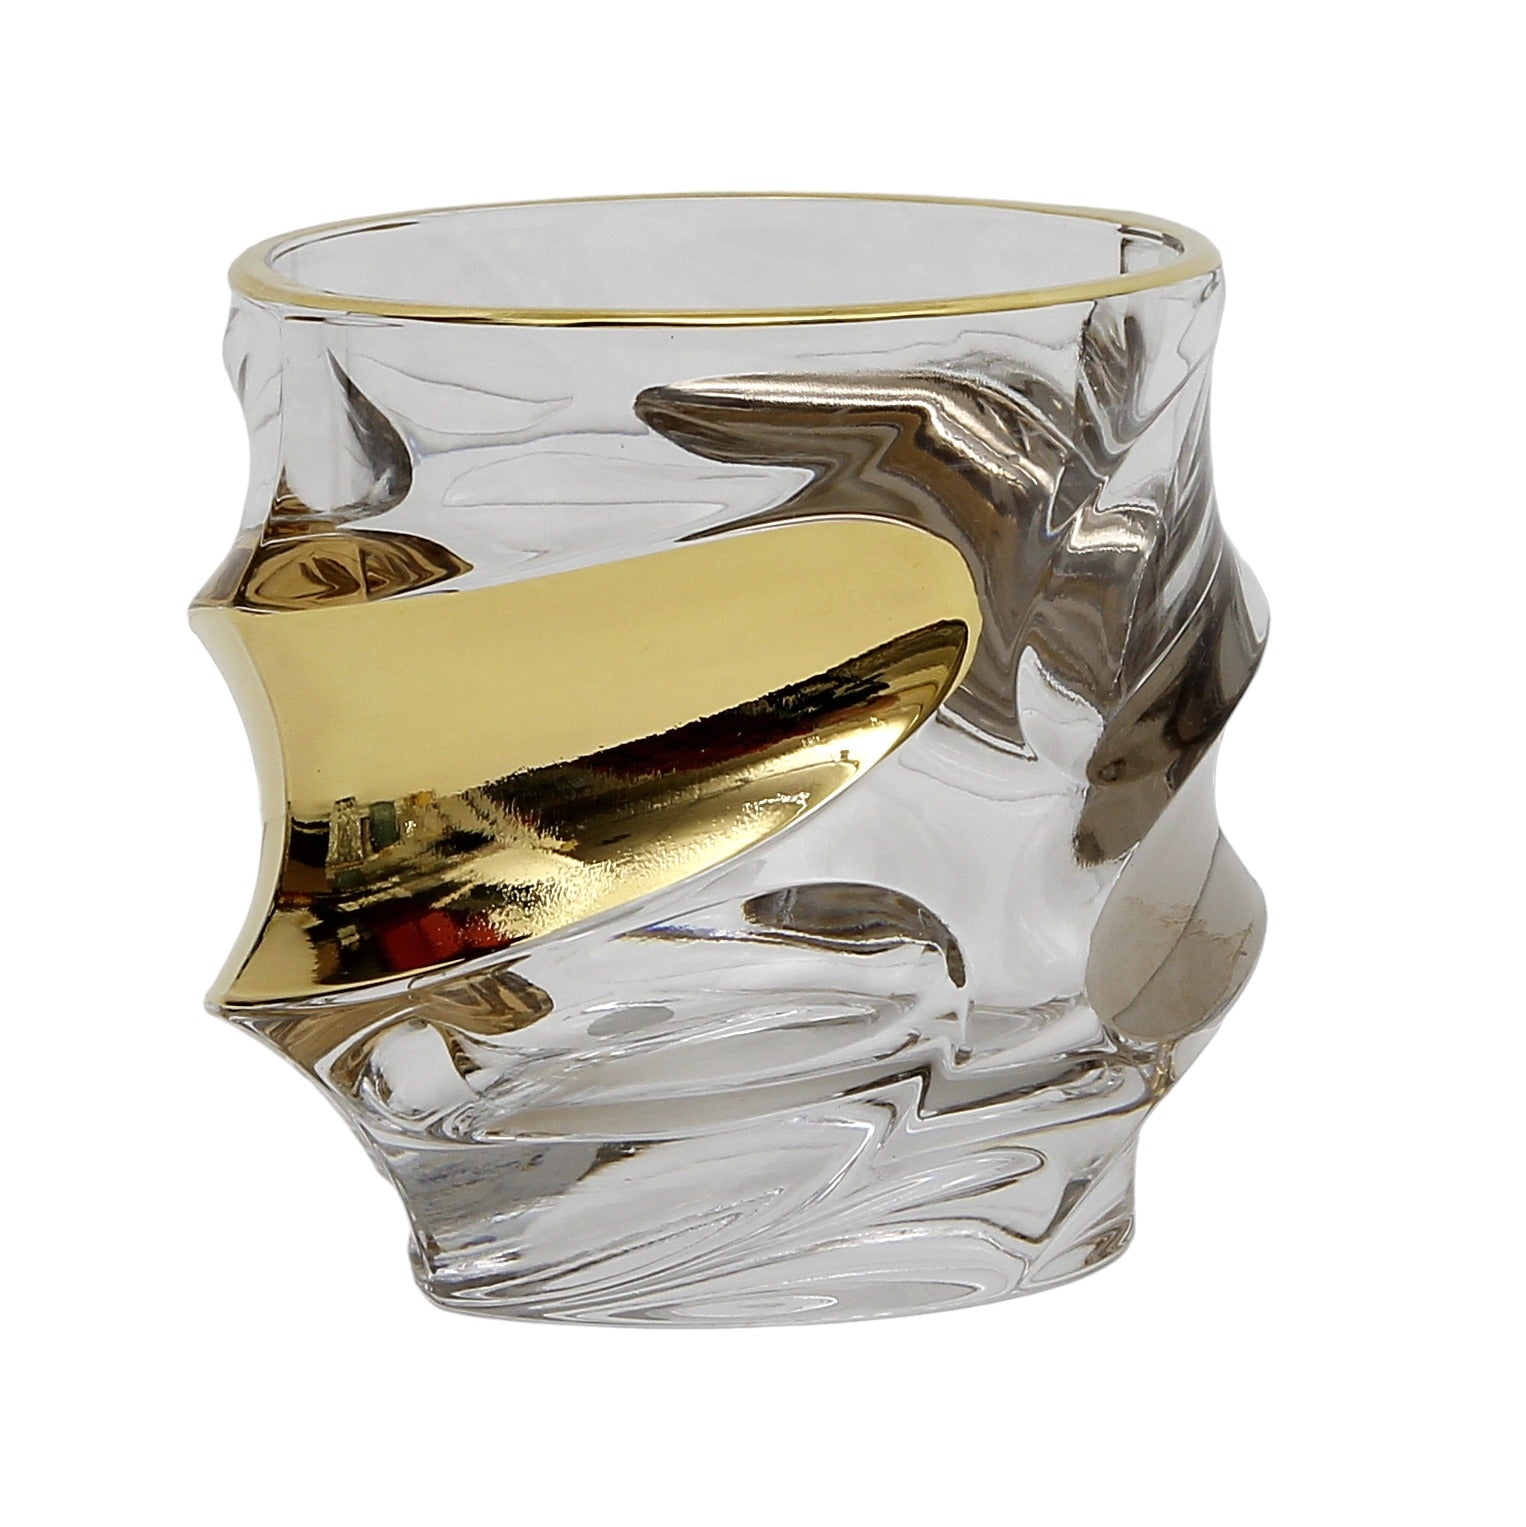 GIFT BOX With two Exquisite Italian Crystal Glass for Whiskey/Old Fashion featuring a 24 Carat Gold & Platinum Accents